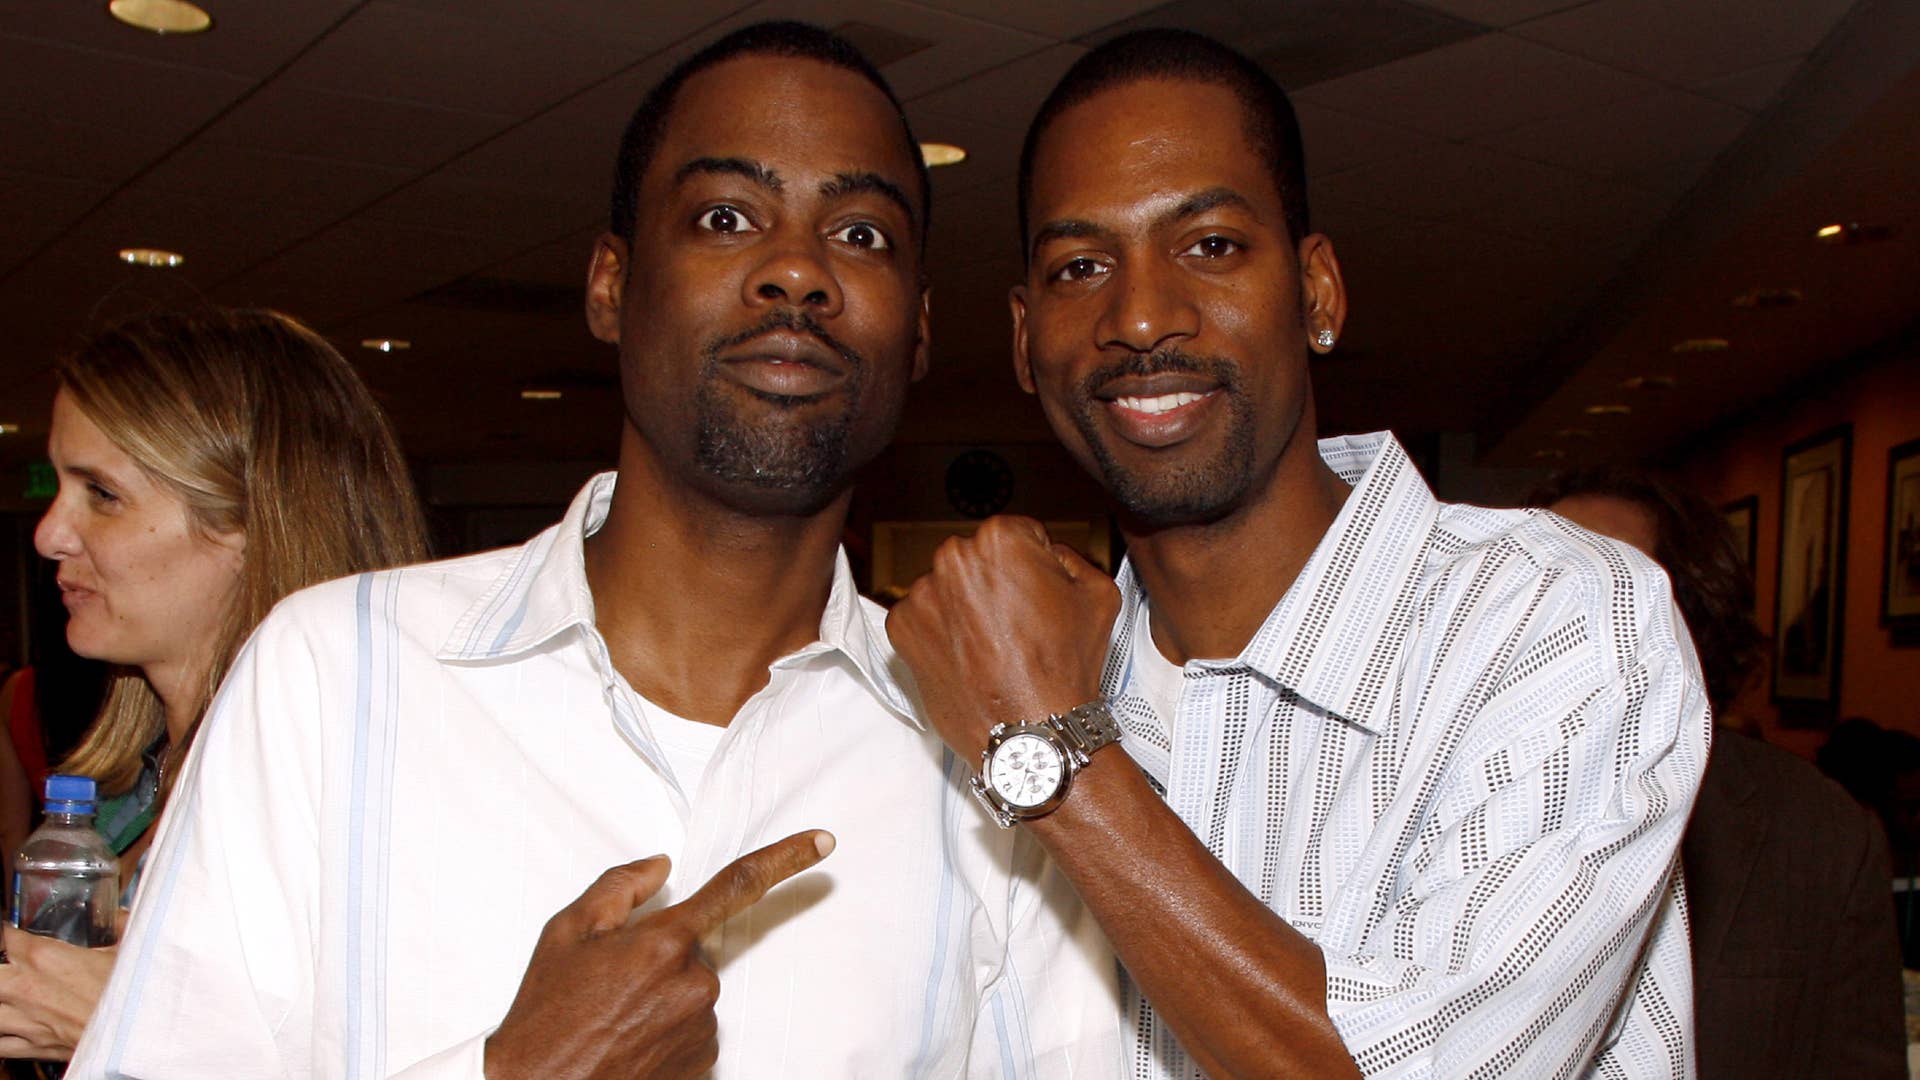 Chris Rock and Tony Rock are pictured together at an event